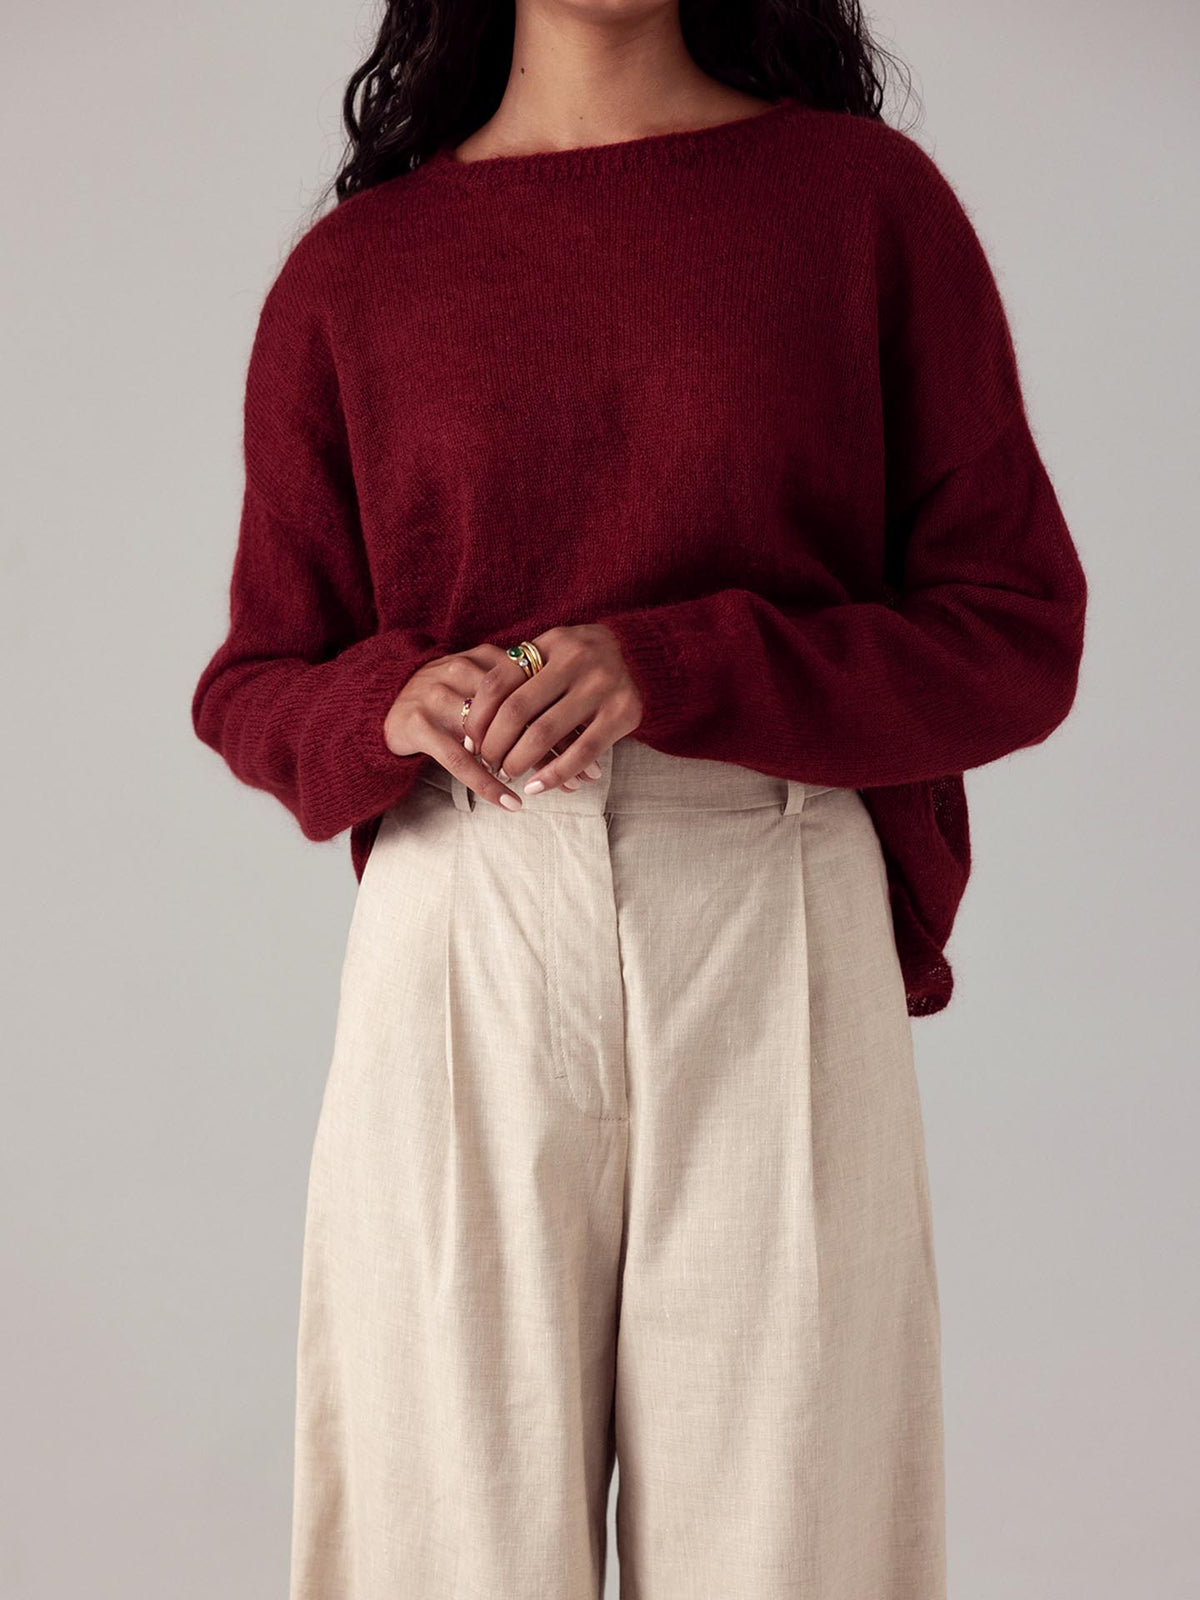 The model is wearing a Dark Cherry feather knit sweater by Francie and beige wide-leg pants.